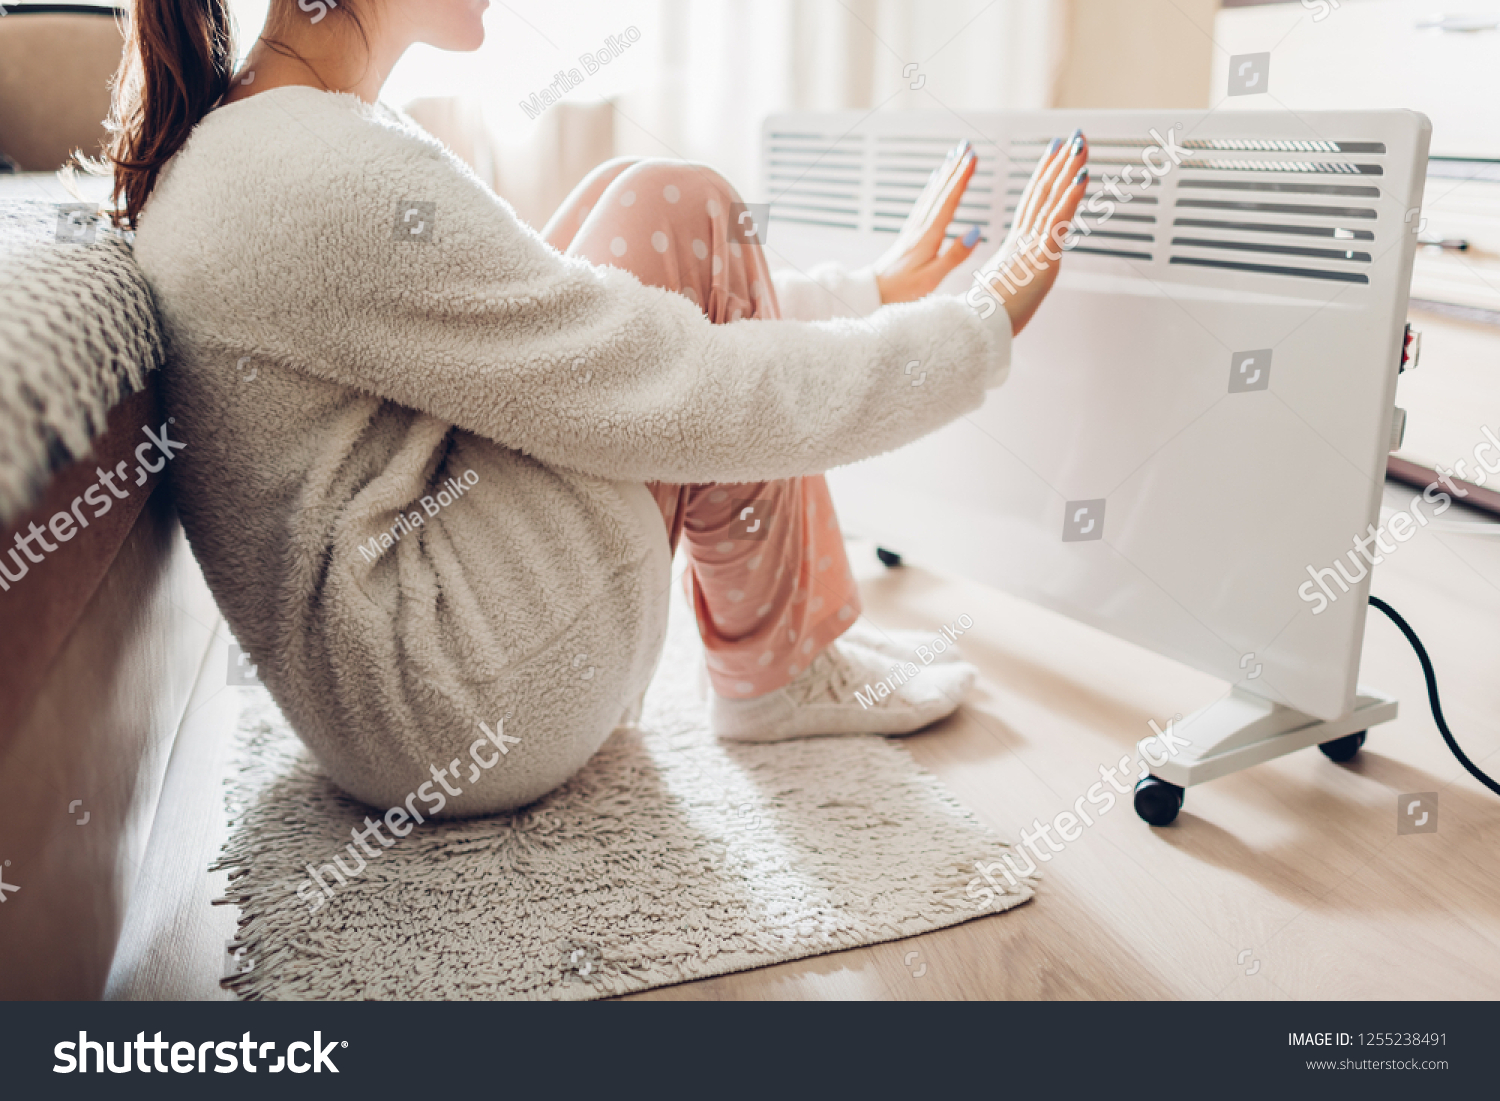 Using heater at home in winter. Woman warming her hands sitting by device and wearing warm clothes. Heating season. #1255238491